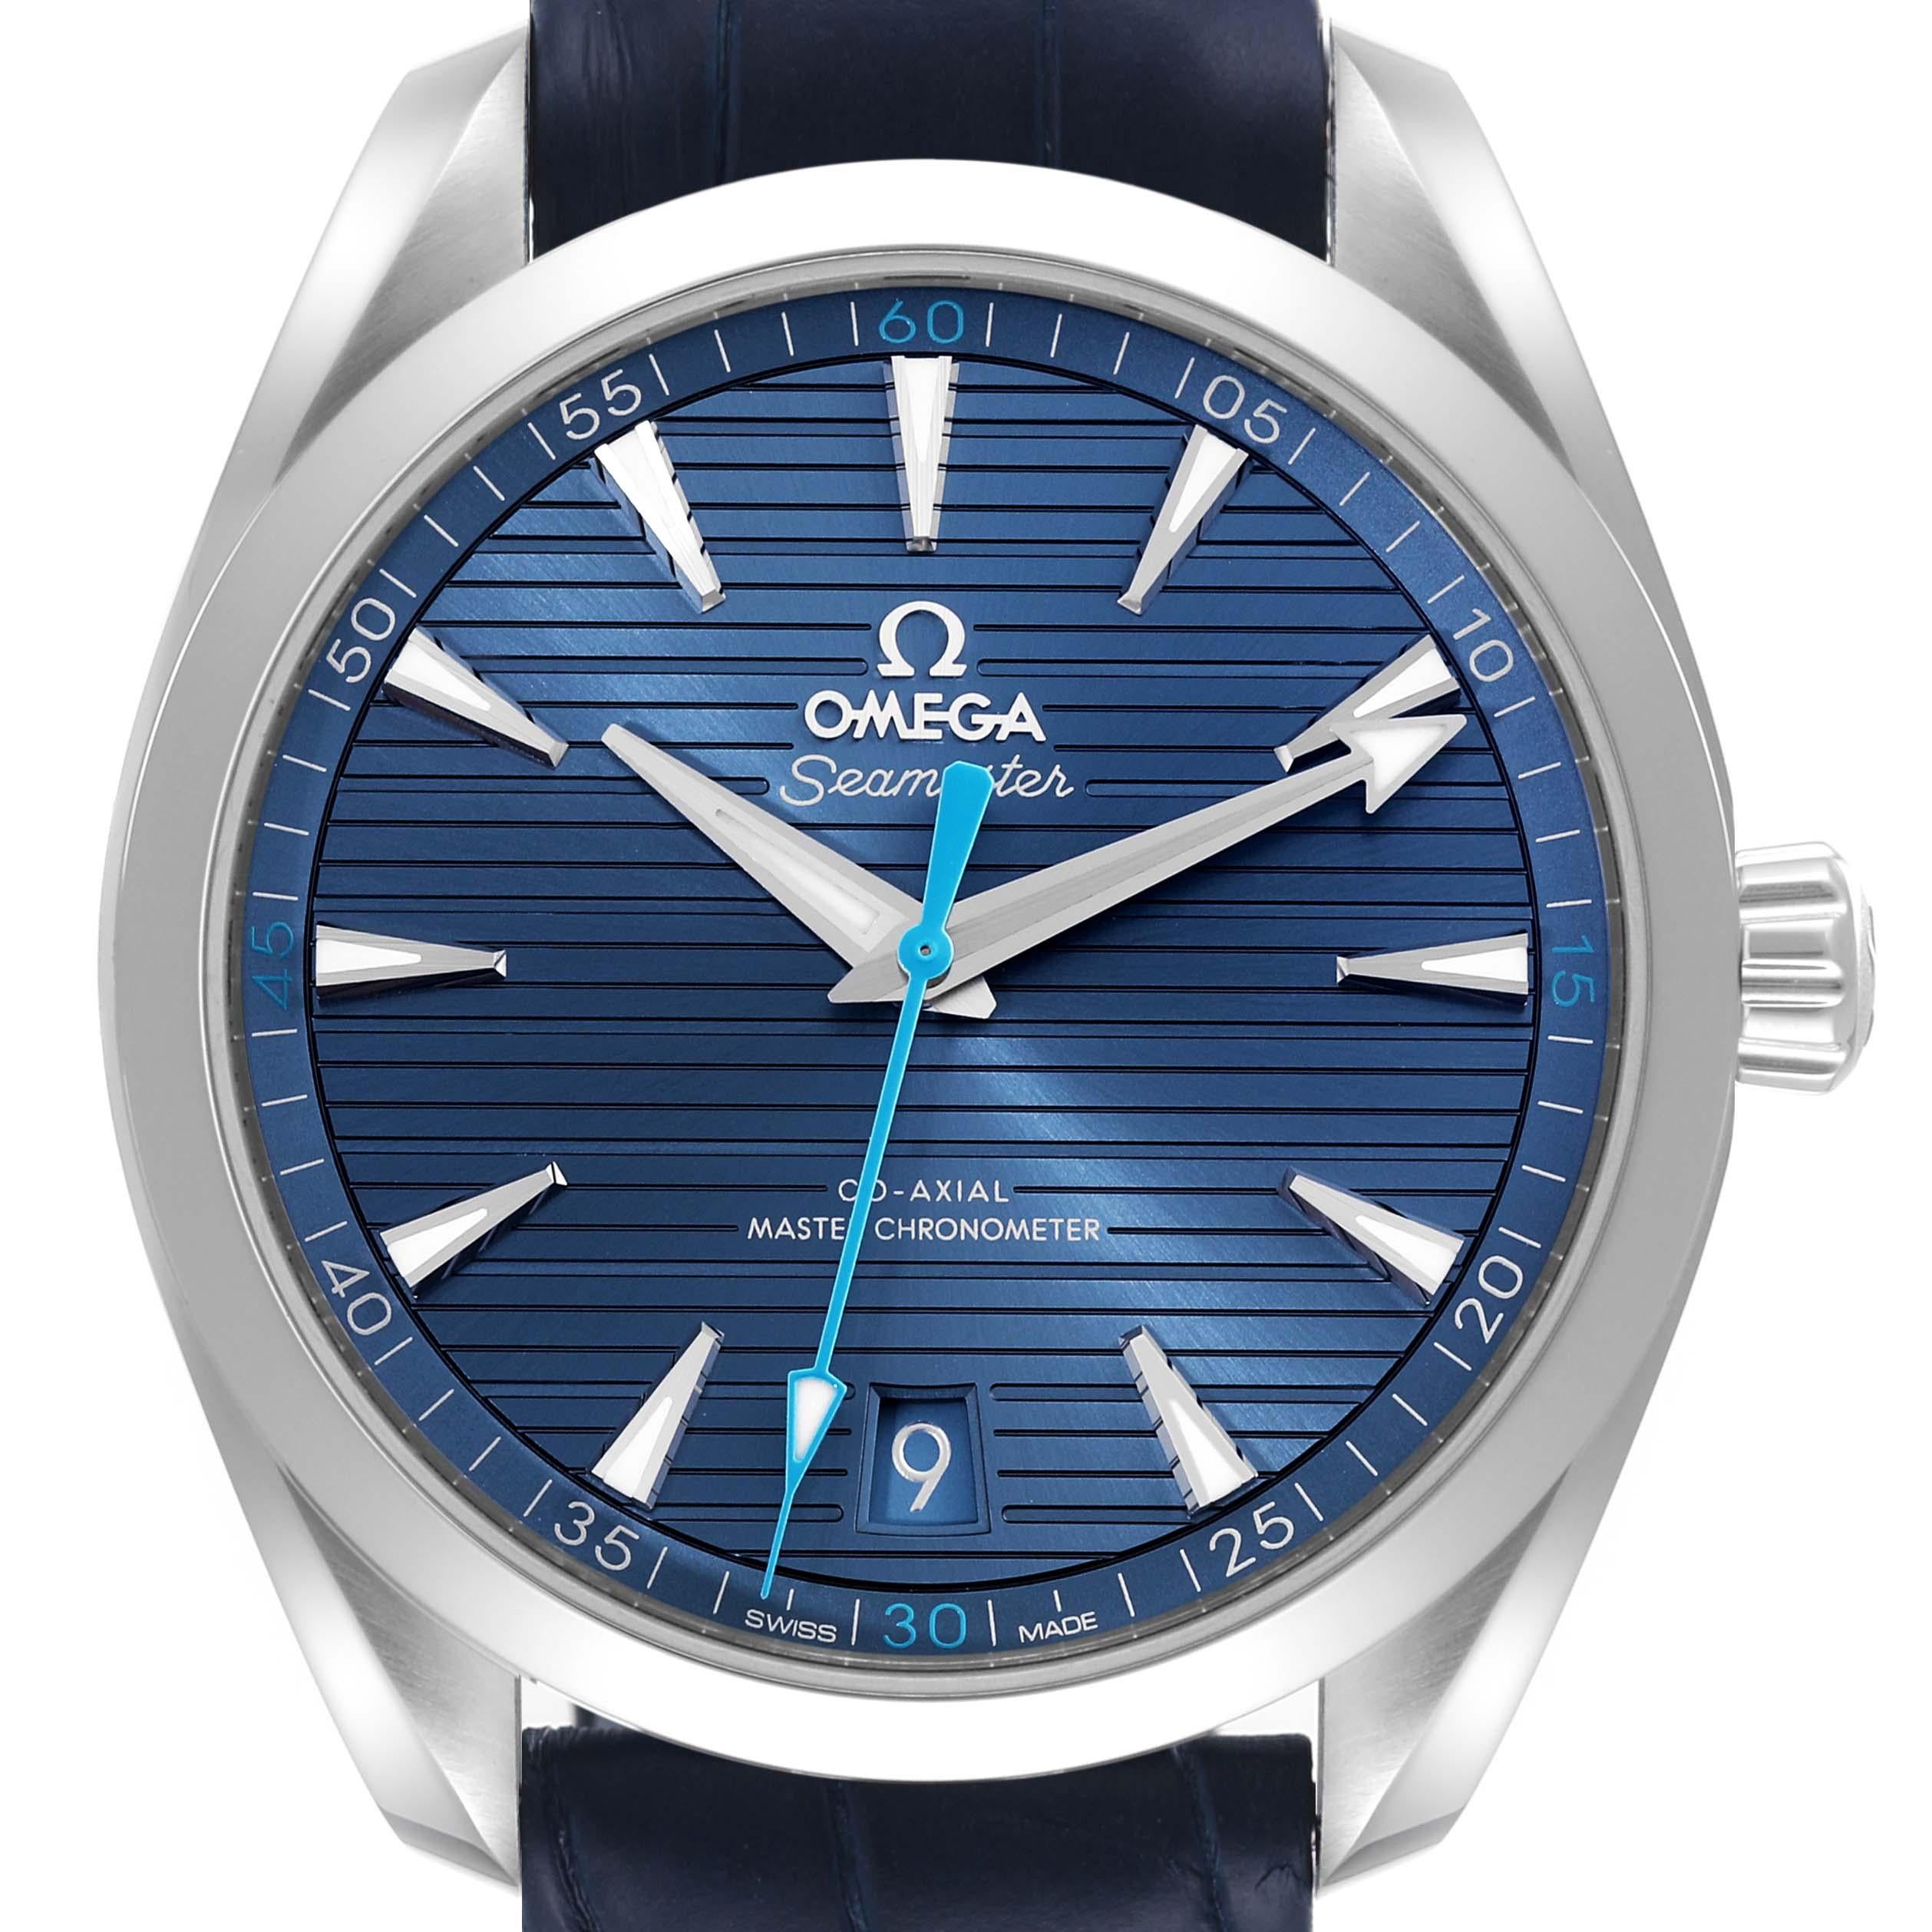 Omega Seamaster Aqua Terra Blue Dial Mens Watch 220.13.41.21.03.002 Unworn. Automatic self-winding movement. Stainless steel round case 41.0 mm in diameter. Case thickness 13.2 mm. Exhibition transparent sapphire crystal caseback. Stainless steel